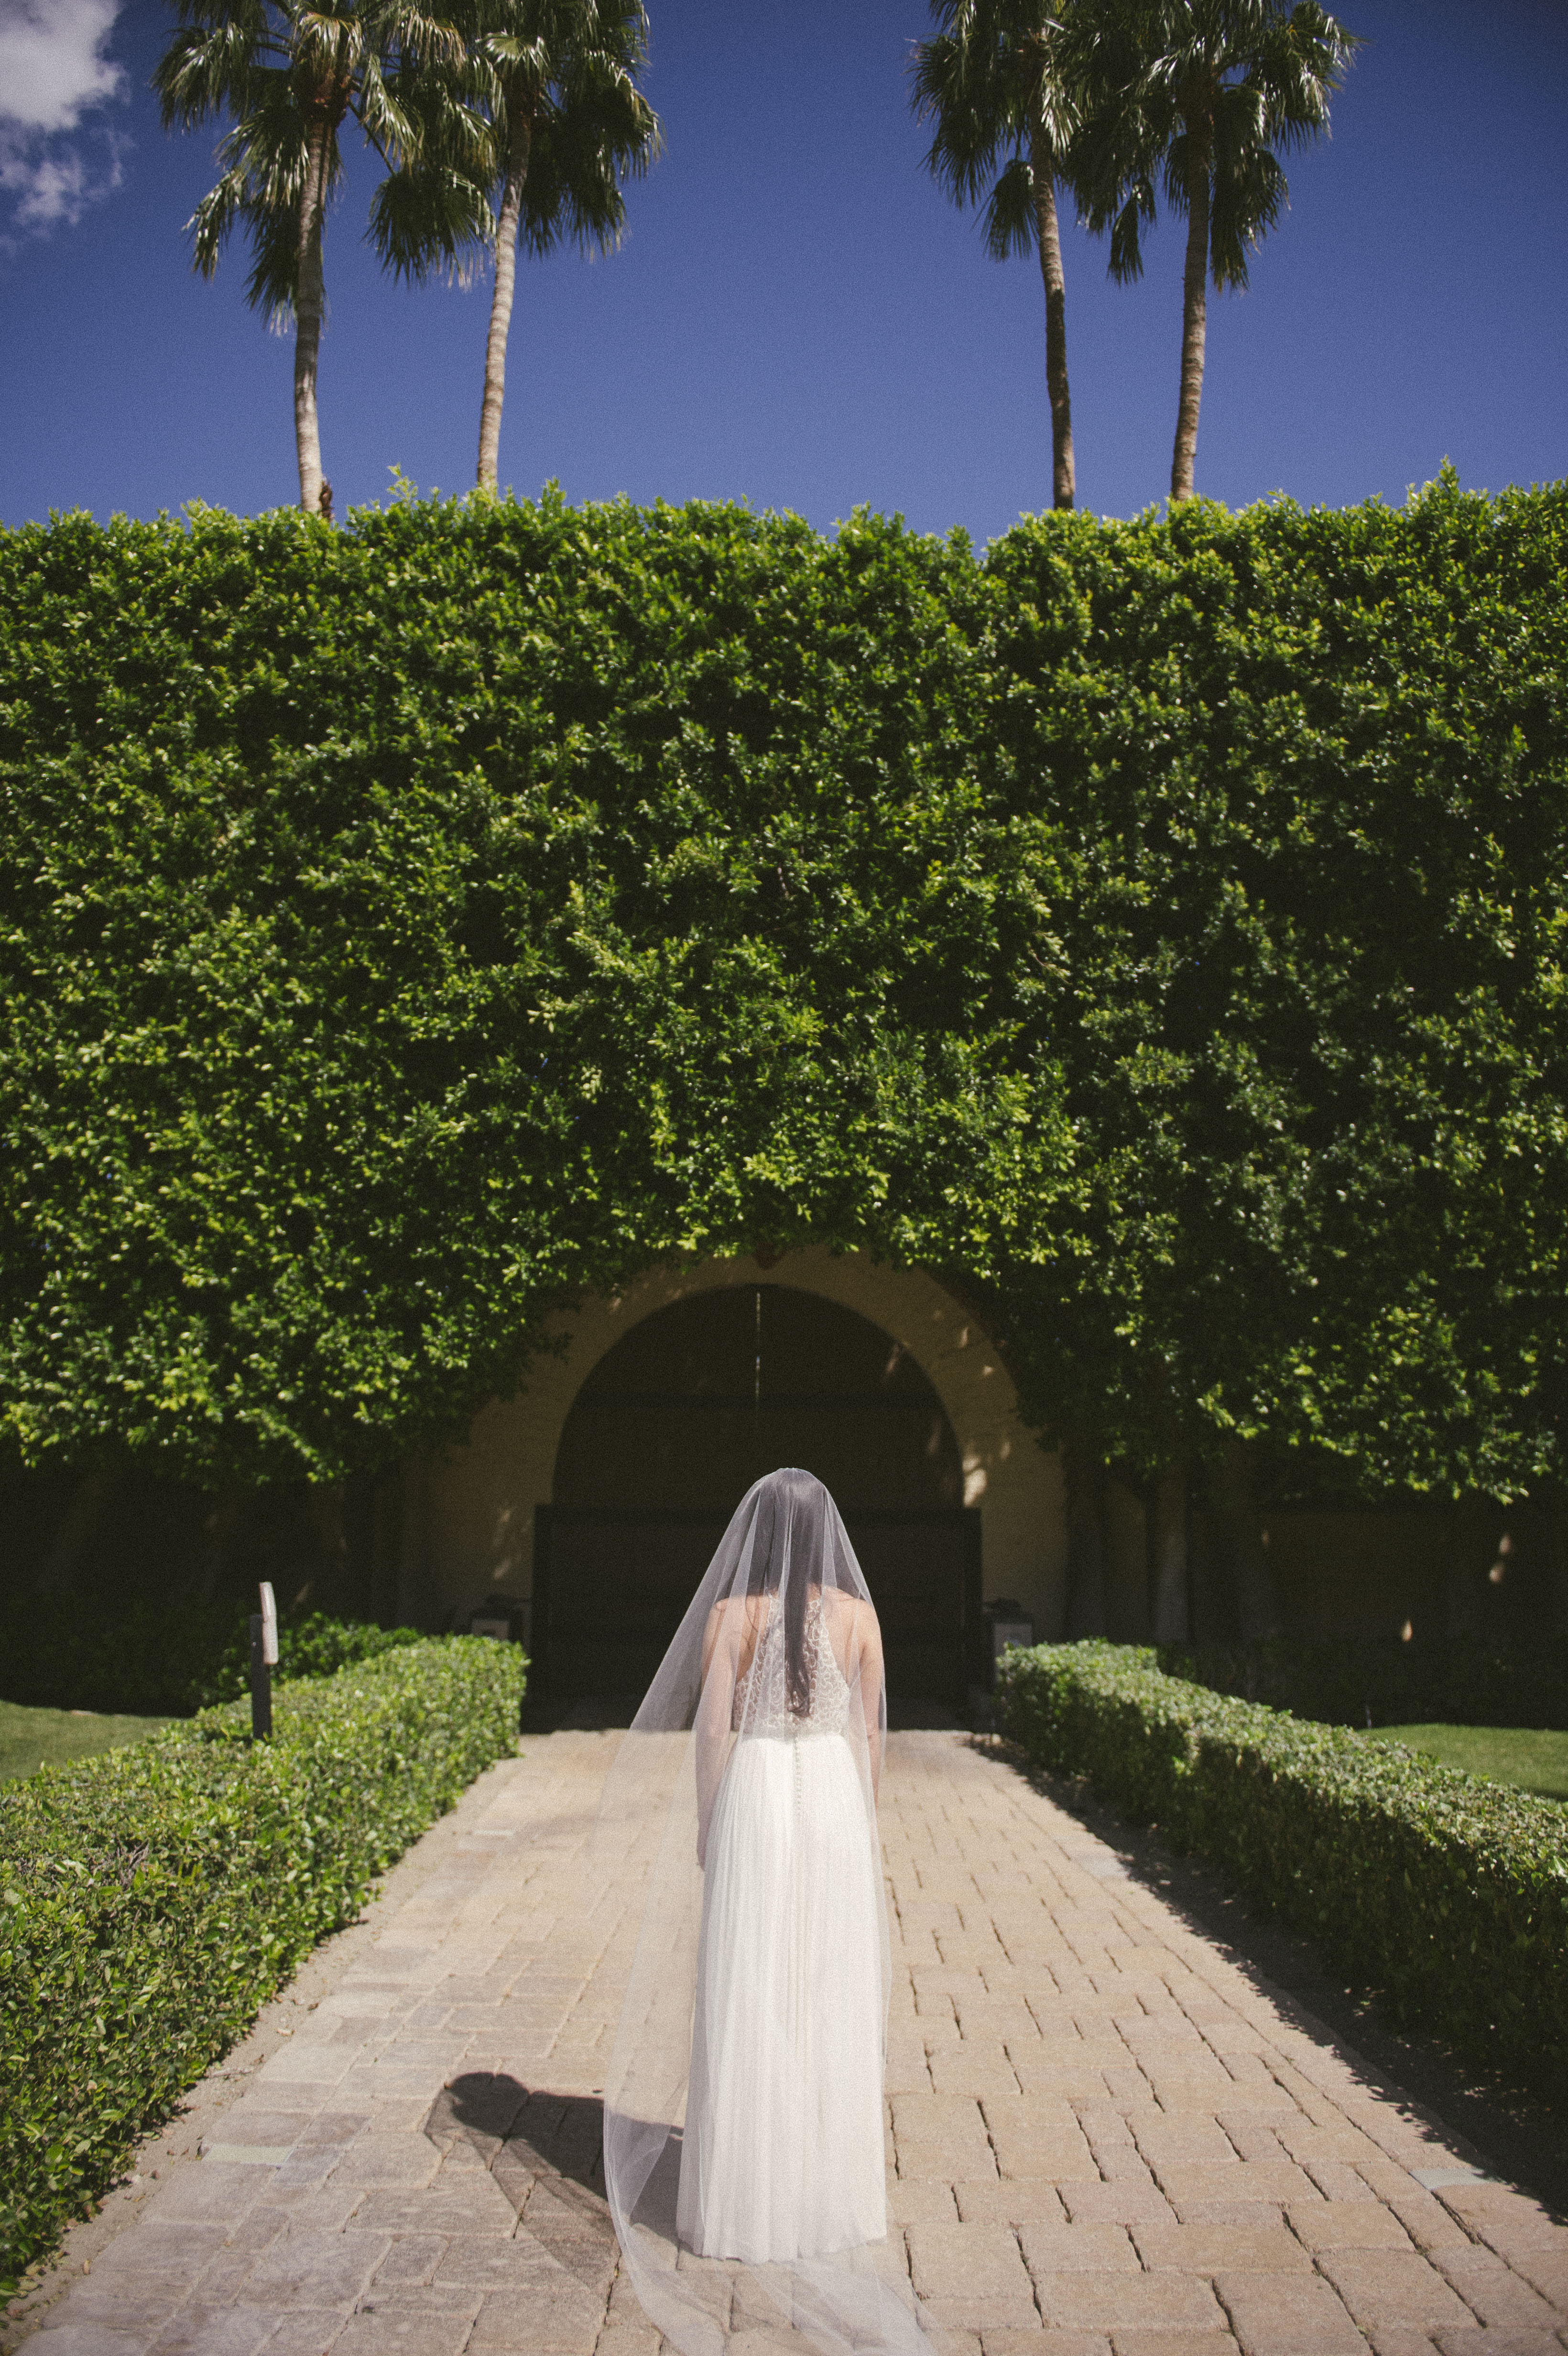 Wedding Photography at Hummingbird Nest Ranch in Simi Valley